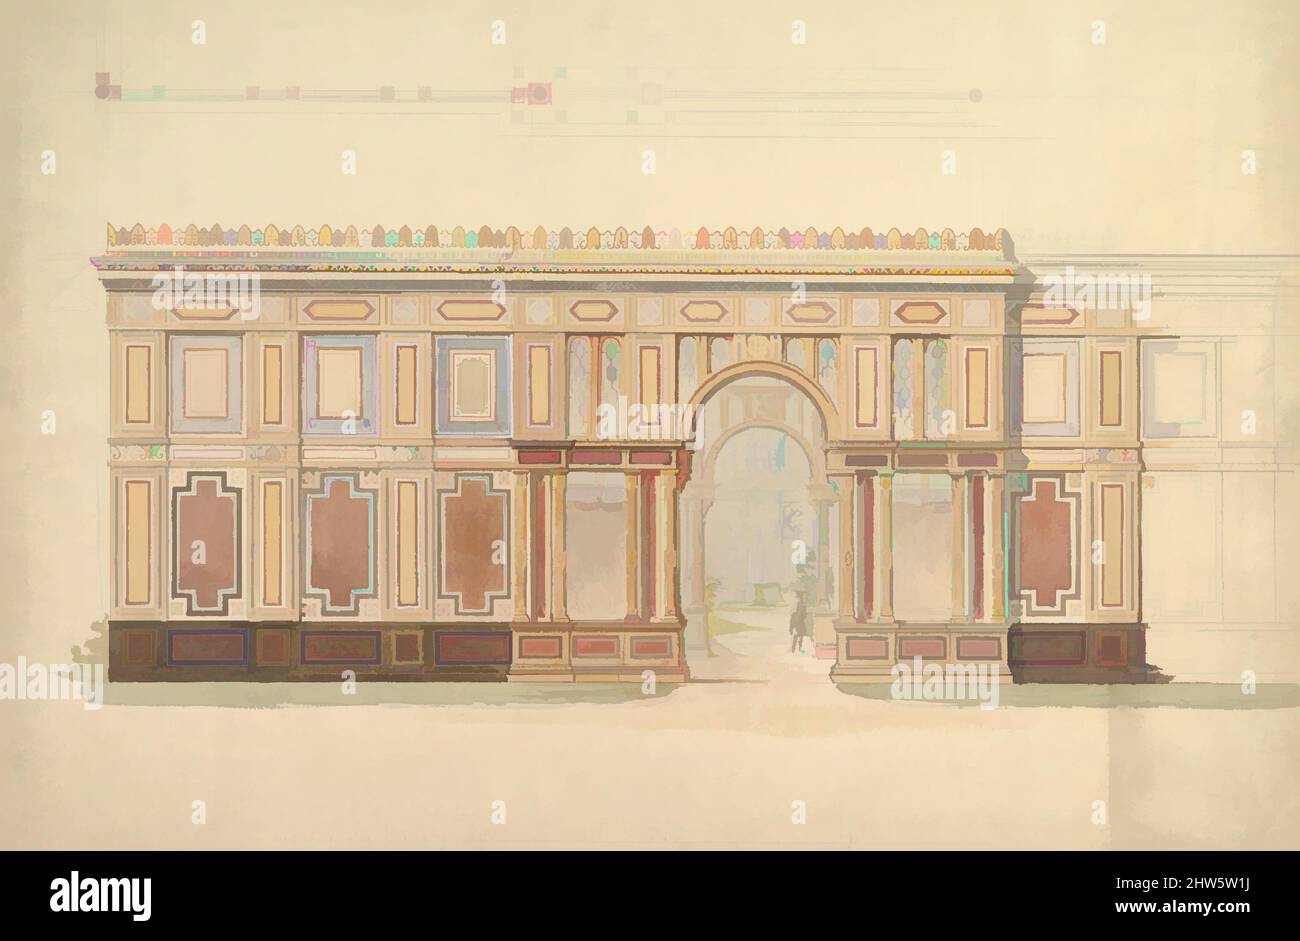 Art inspired by Elevation and Cross-Section of of Gallery Wall, 19th century, Graphite and watercolor, sheet: 14 1/2 x 21 3/8 in. (36.8 x 54.3 cm), John Gregory Crace (British, London 1809–1889 Dulwich), and Son, Classic works modernized by Artotop with a splash of modernity. Shapes, color and value, eye-catching visual impact on art. Emotions through freedom of artworks in a contemporary way. A timeless message pursuing a wildly creative new direction. Artists turning to the digital medium and creating the Artotop NFT Stock Photo